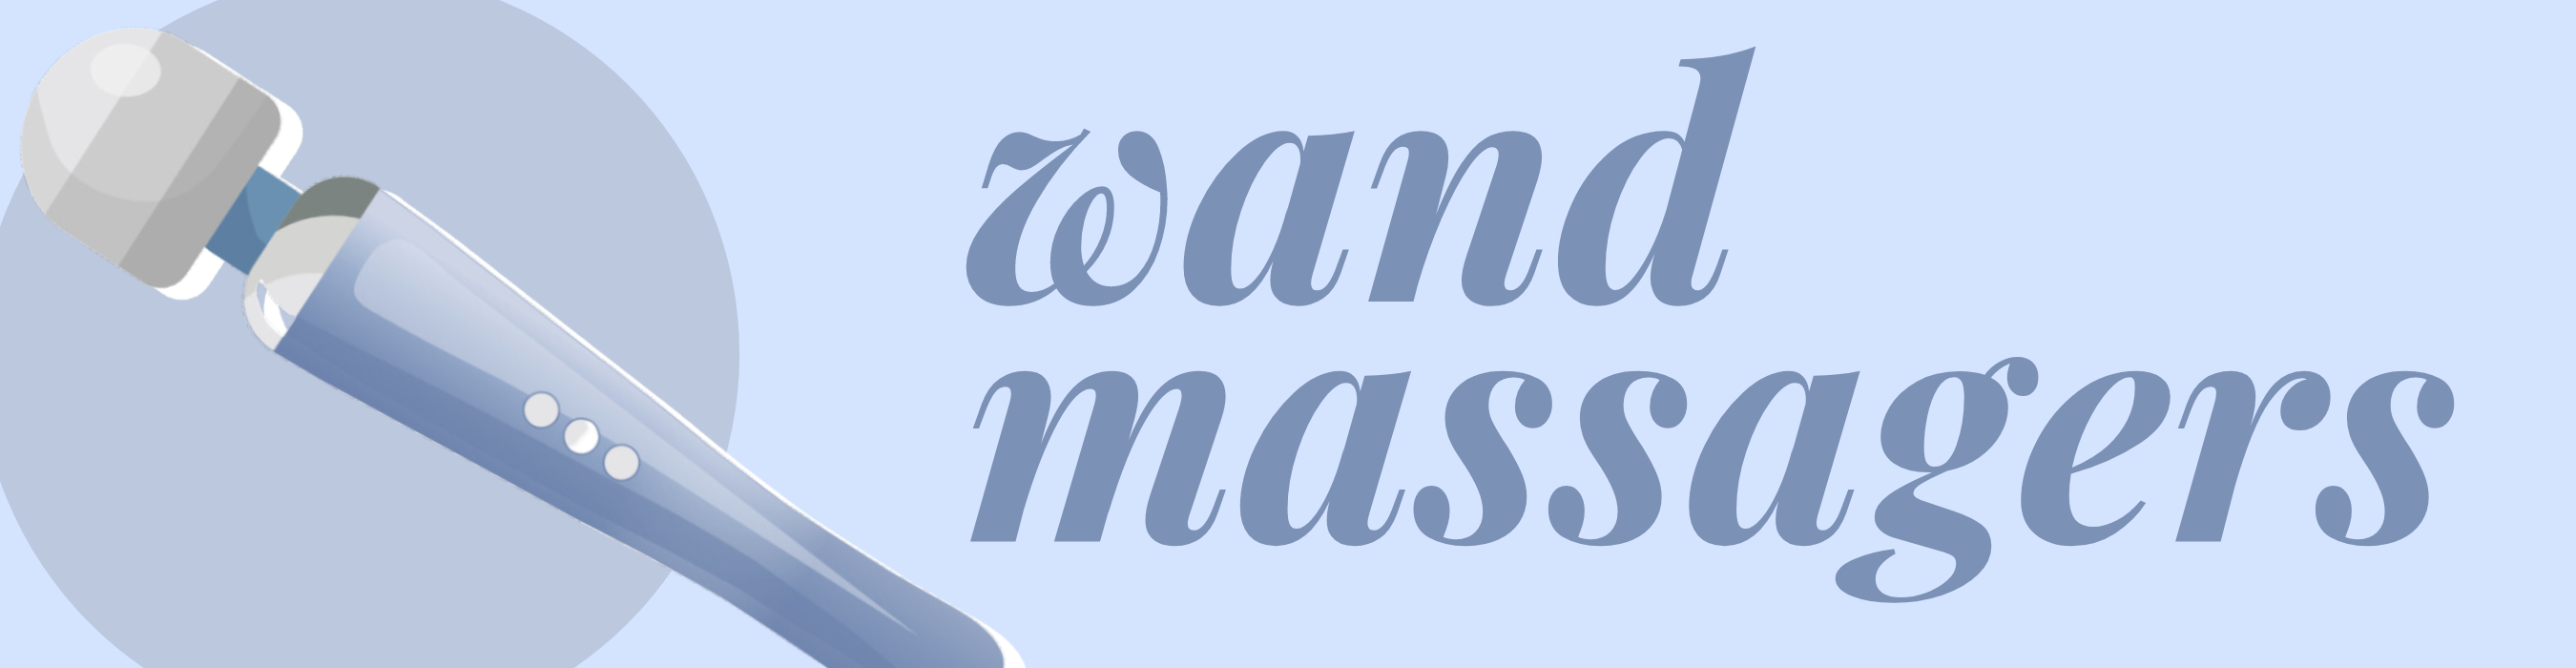 Banner illustration of our best selling wand massager. Image reads Wand Massagers.